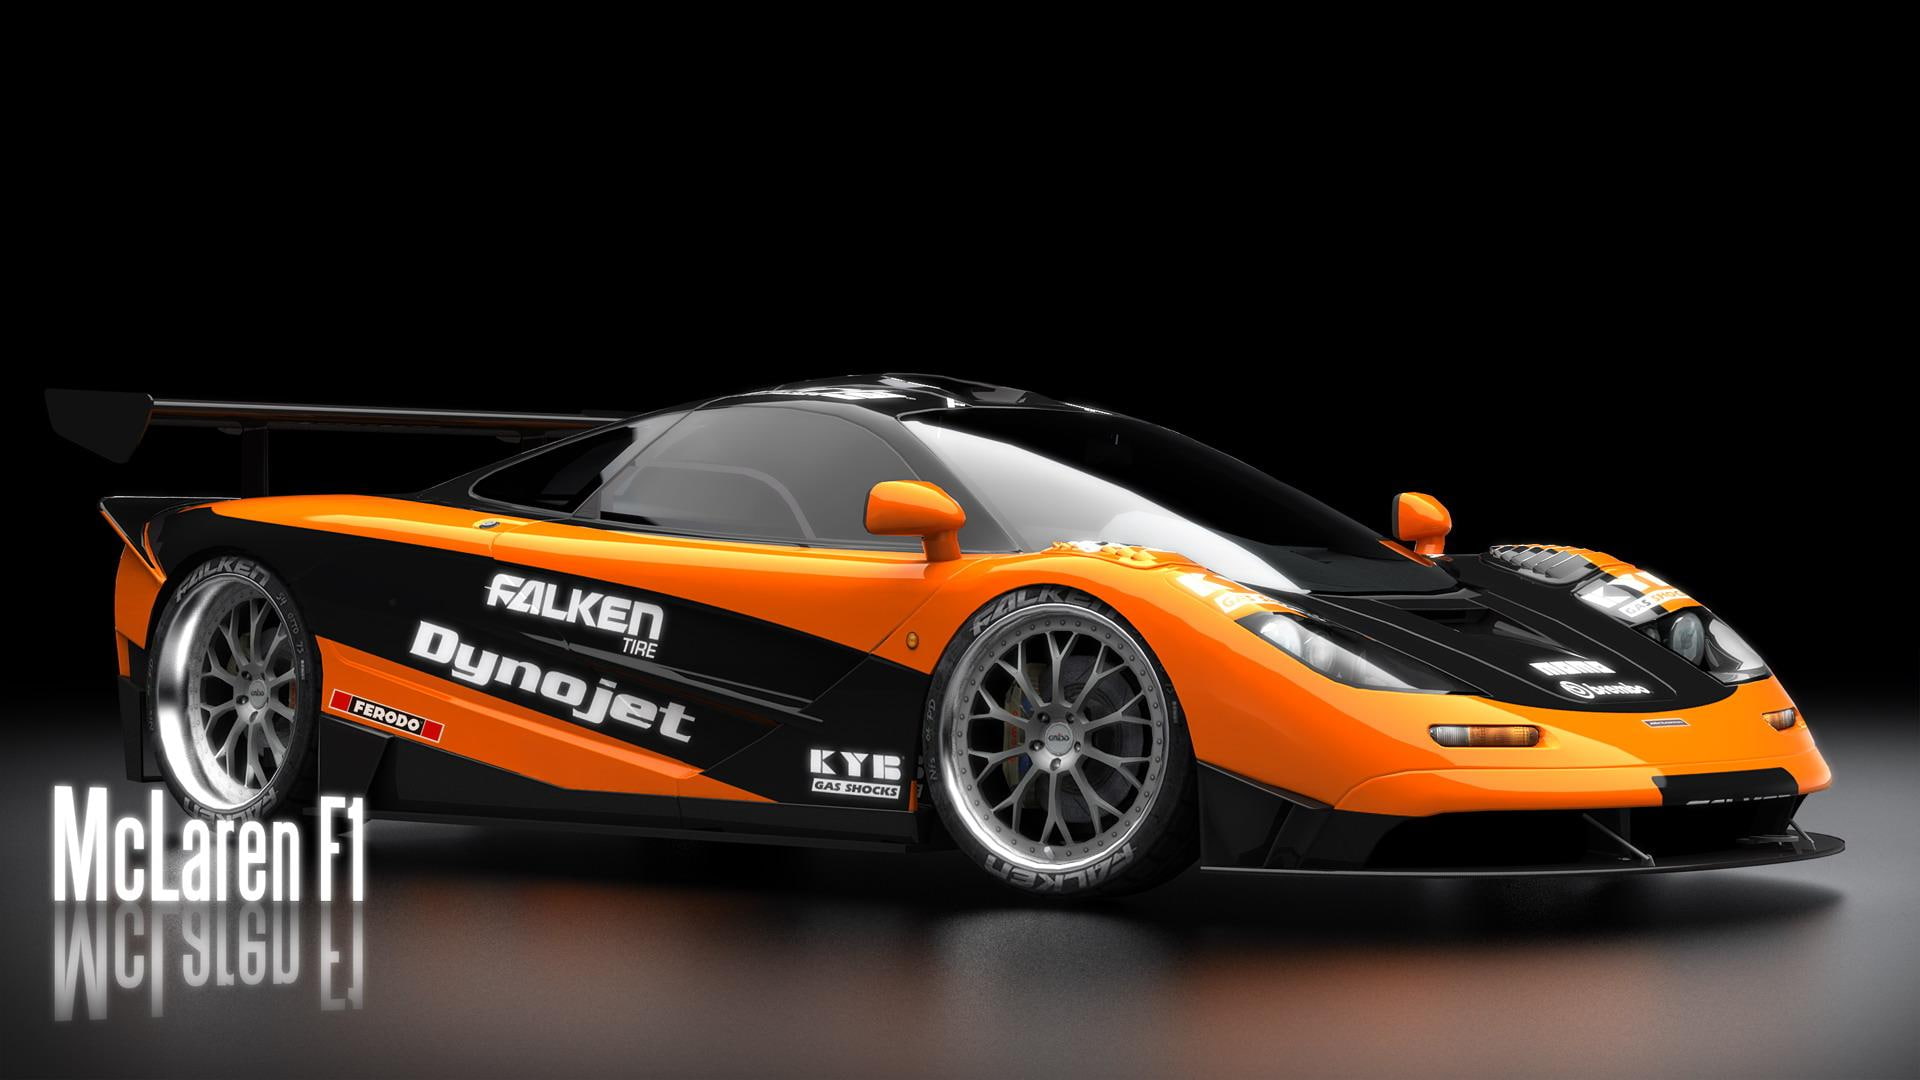 Mclaren f1 Need for speed Shift, other cars